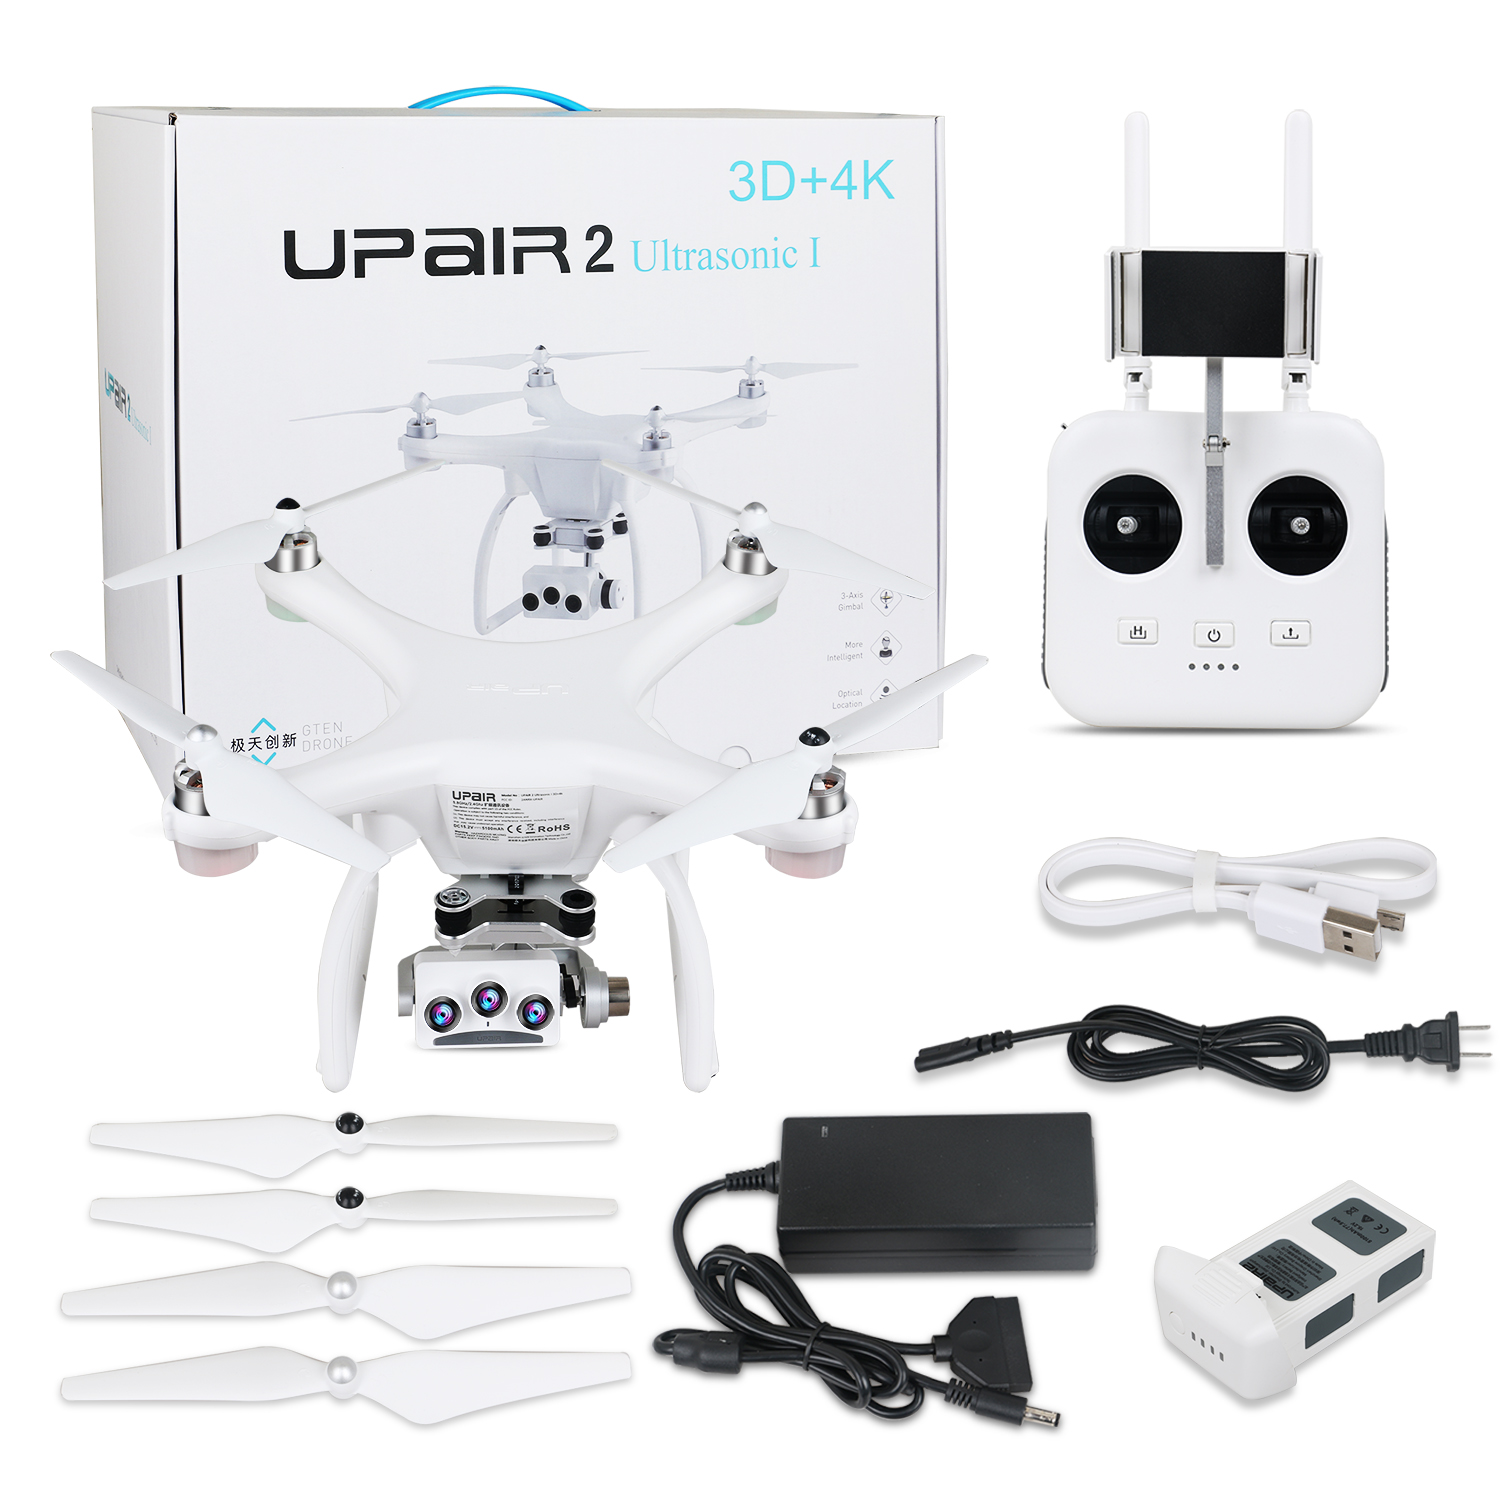 UPair 2 Ultrasonic 5.8G 1KM FPV 3D + 4K + 16MP Camera With 3 Axis Gimbal GPS RC Quadcopter Drone RTF 12